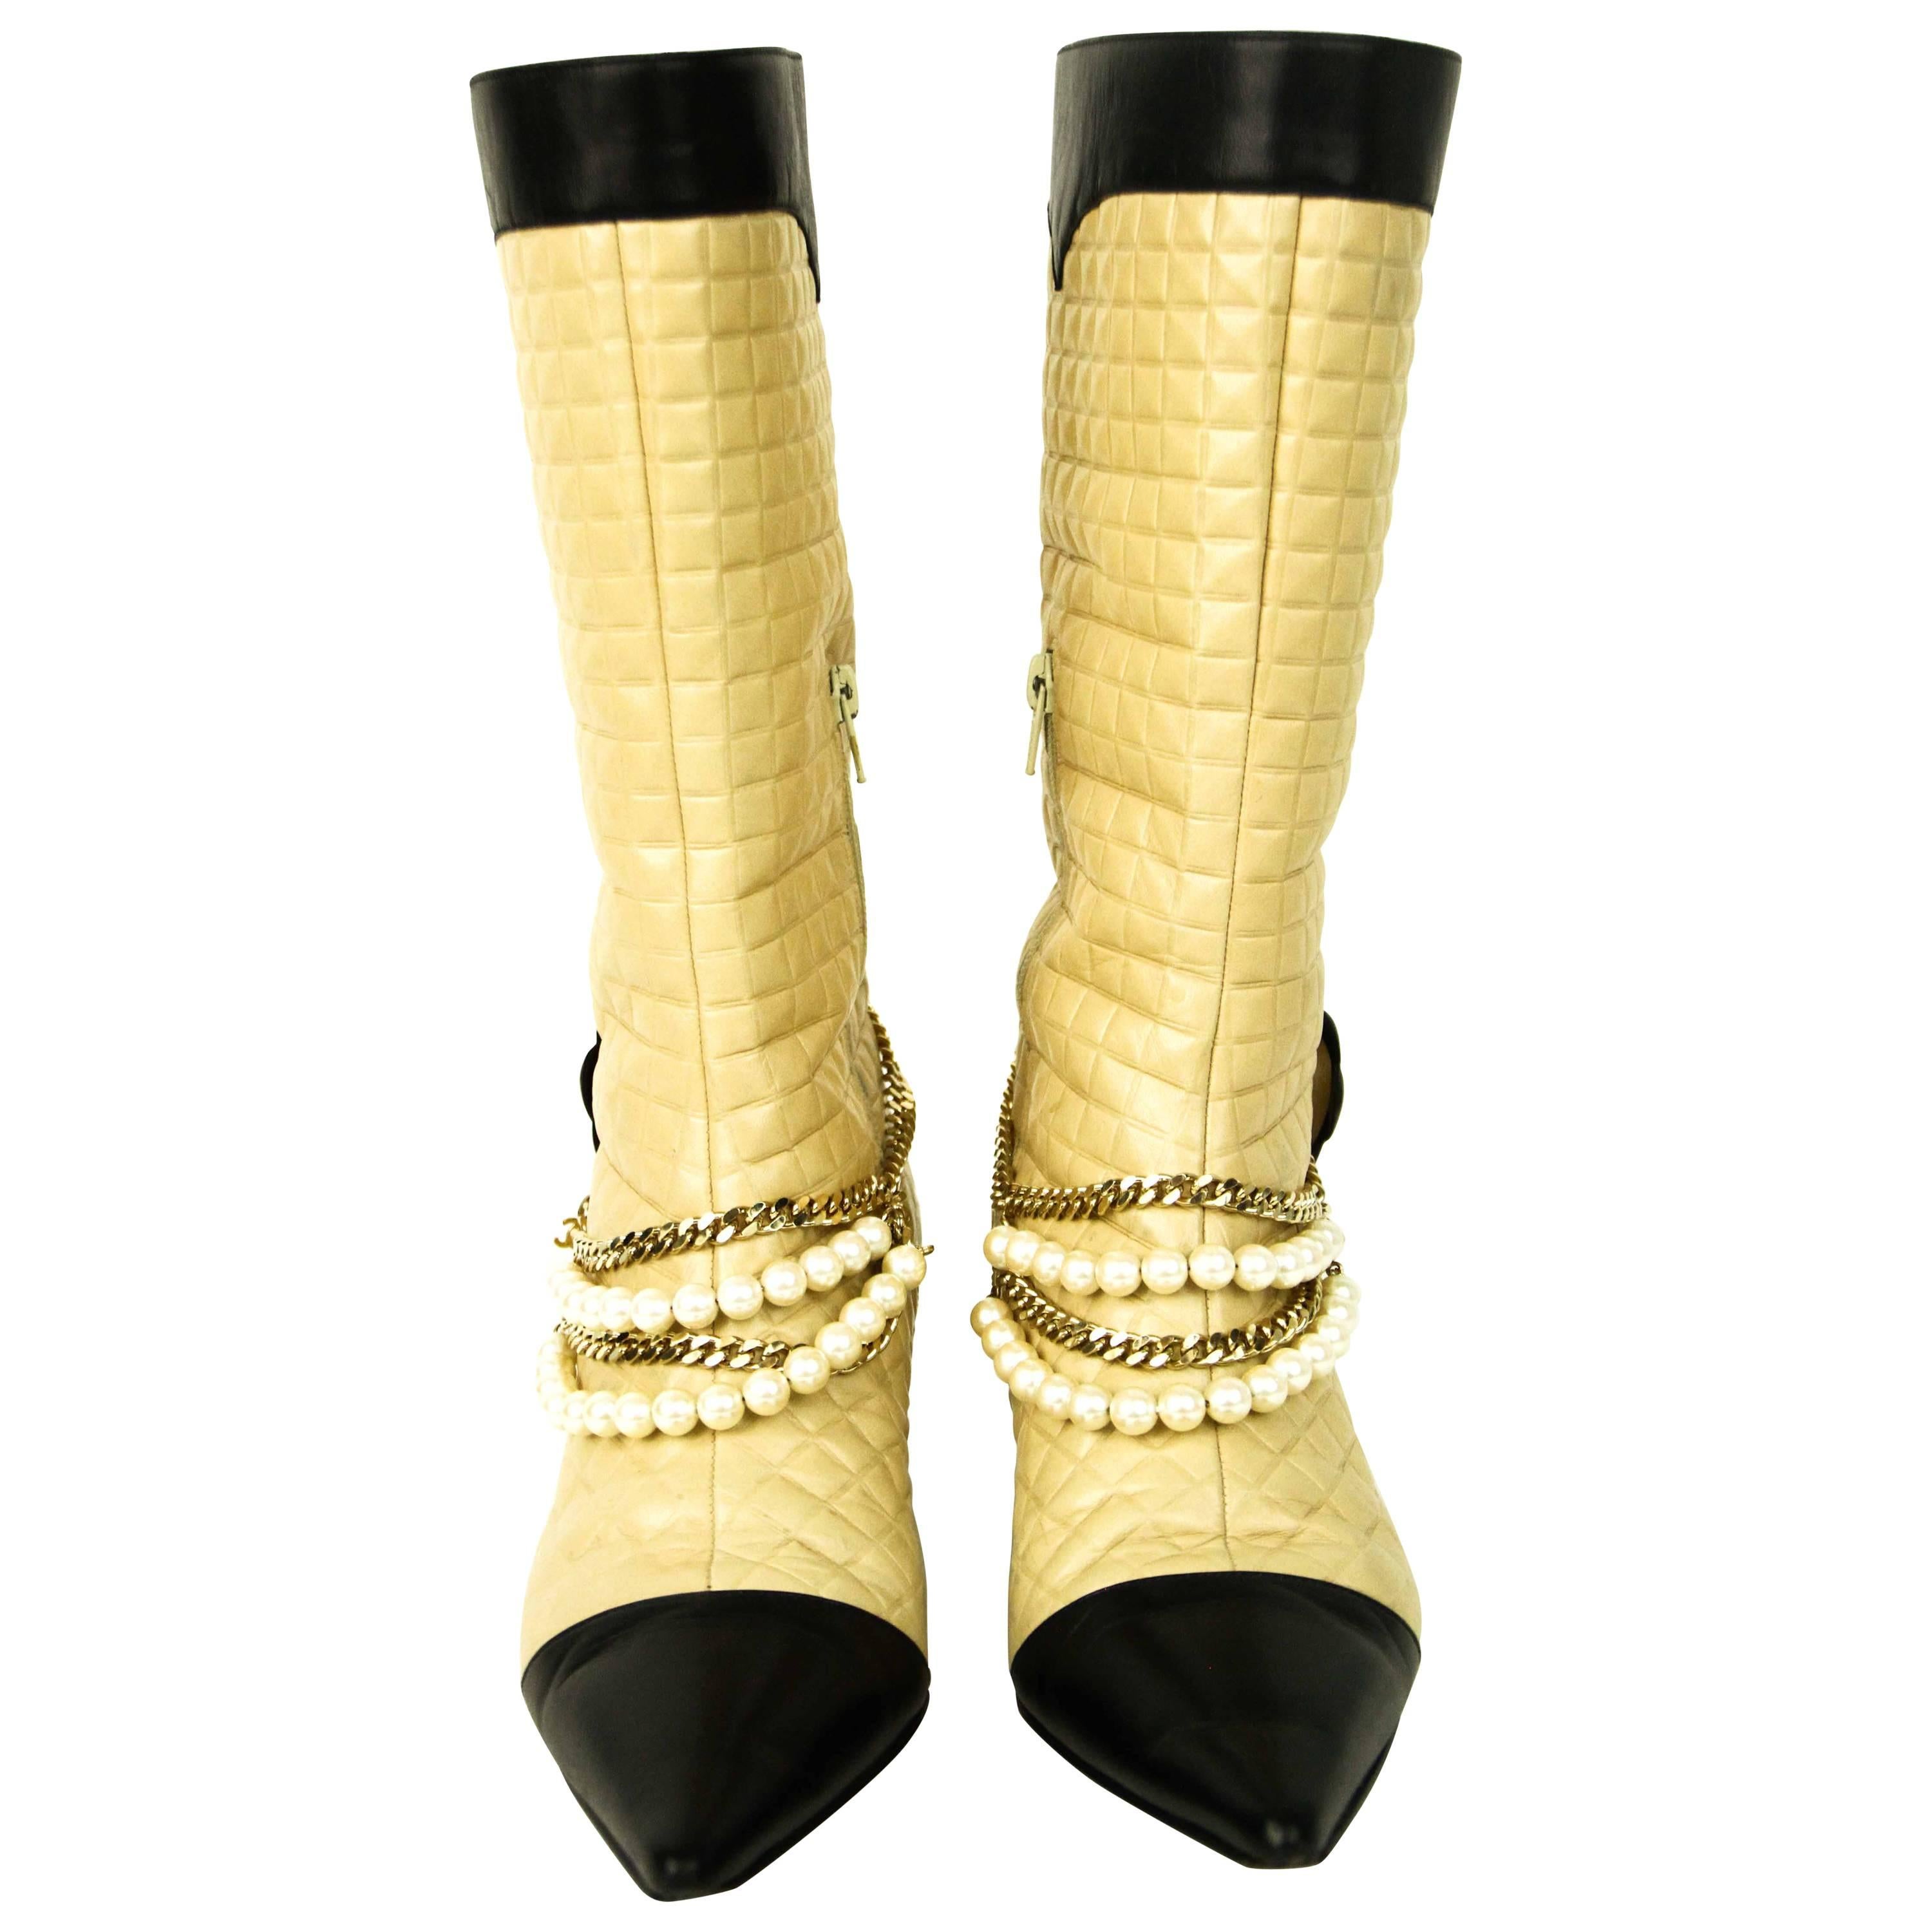 Offered is an authentic and pre-owned  pair of Chanel mid-calf quilted boots in 39.5.  Beige leather with a black cap toe embellished with a gold tone chain, pearls and leather camellia flower, chain is detachable.  Heel is two inches. 
Signs if